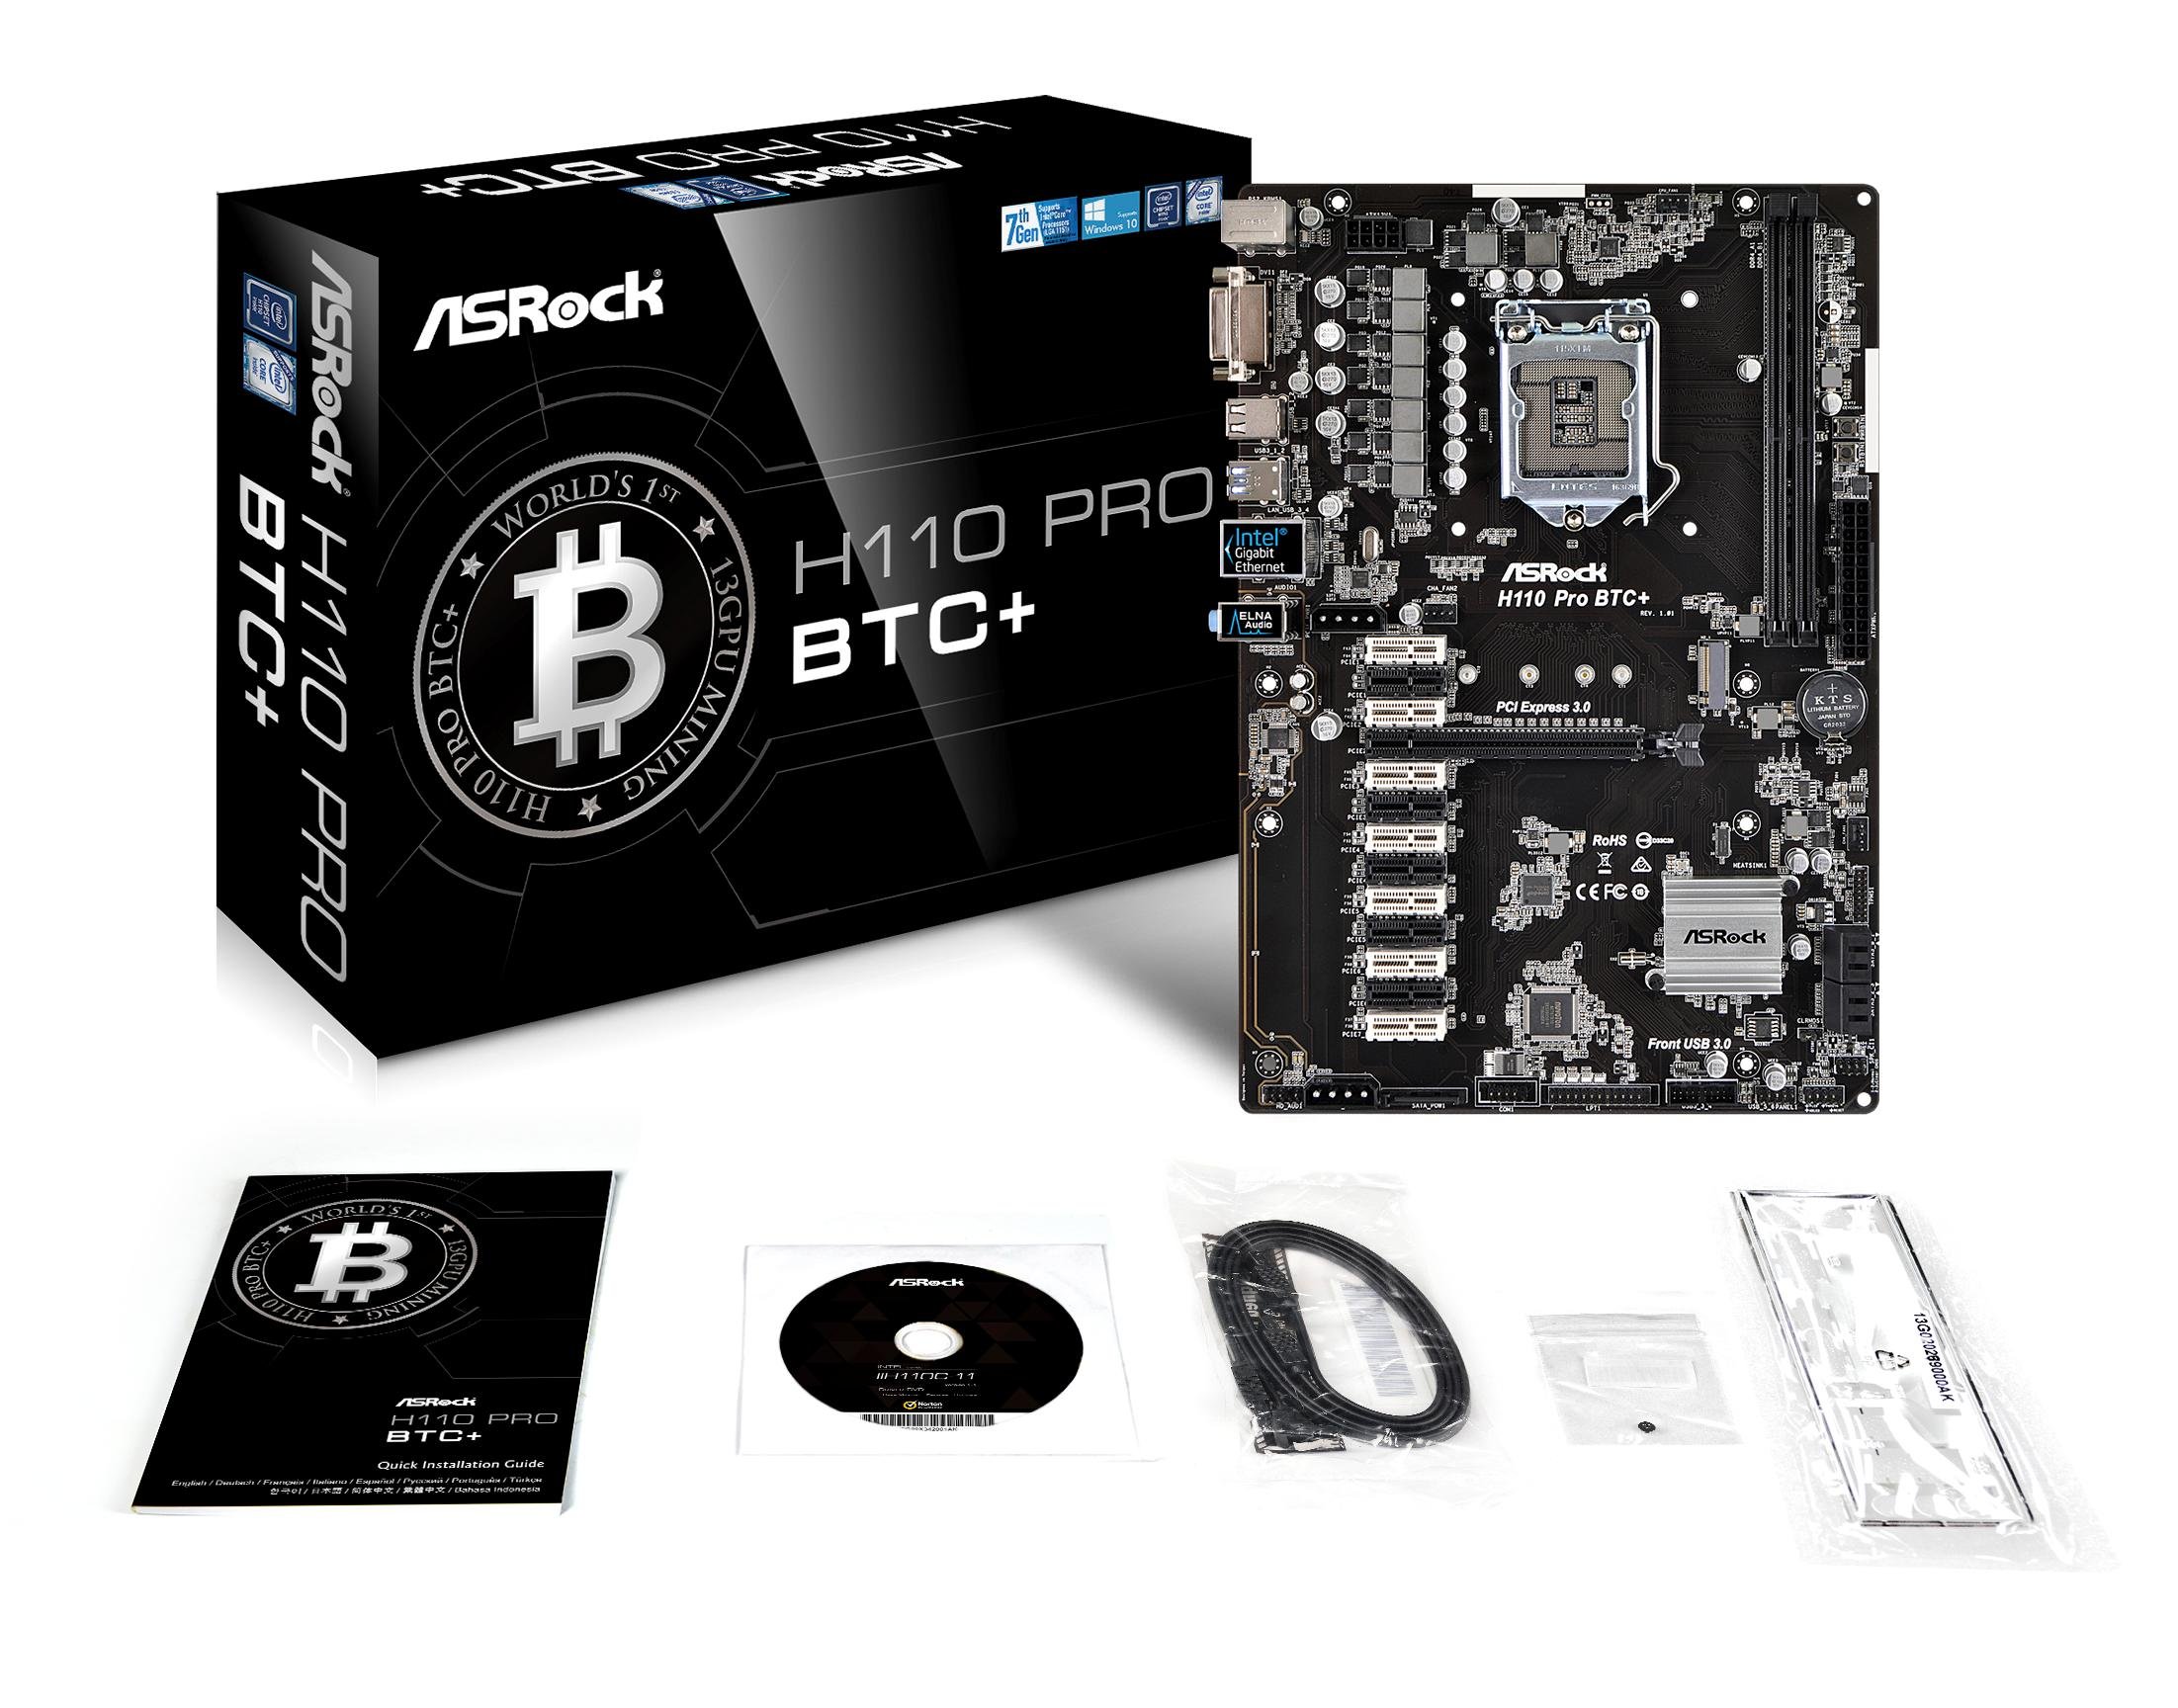 ASRock Motherboard H Pro BTC+ driver download and accessories information, as well as FAQs.